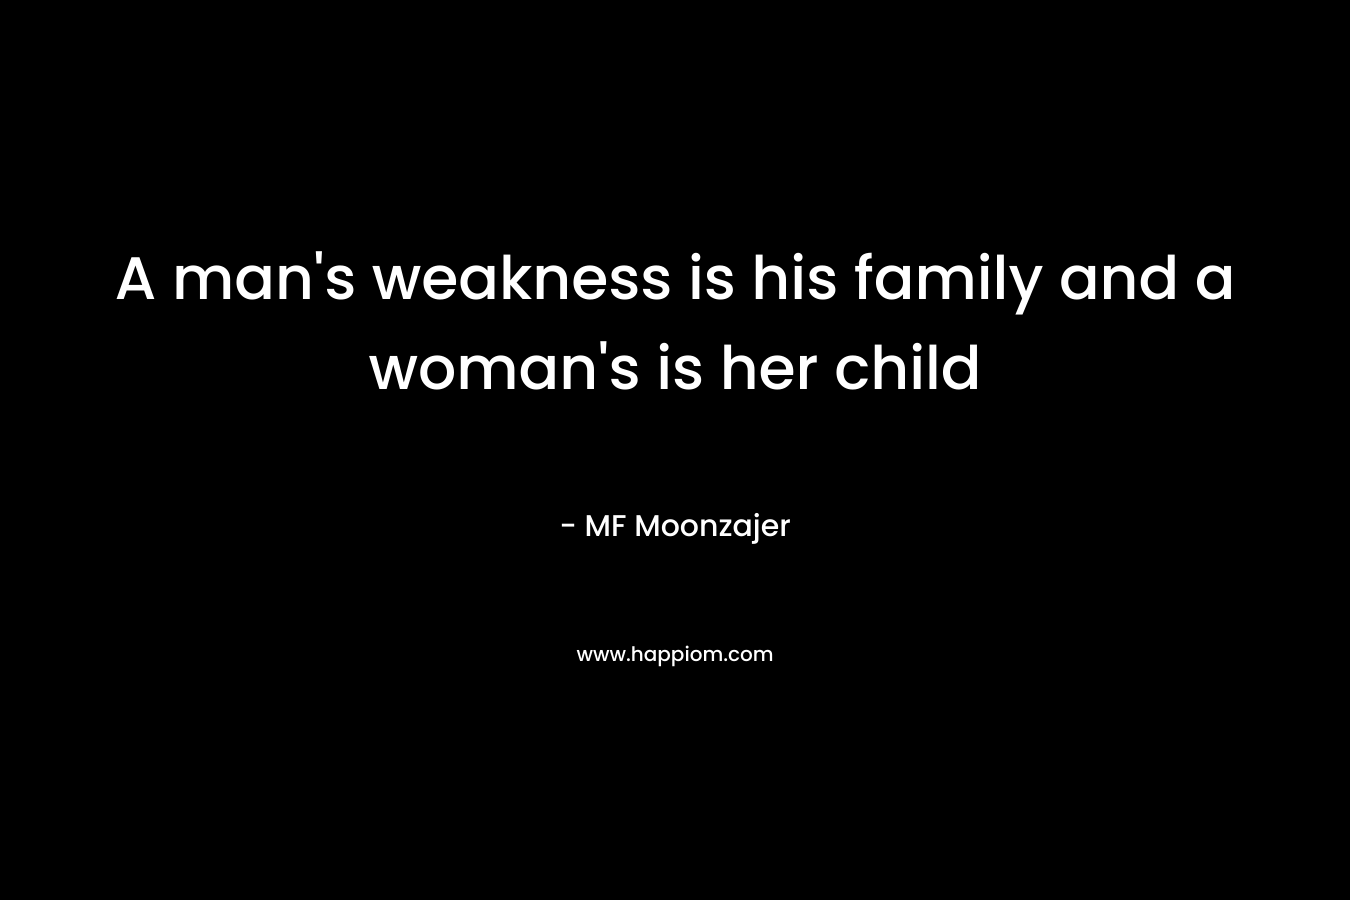 A man's weakness is his family and a woman's is her child